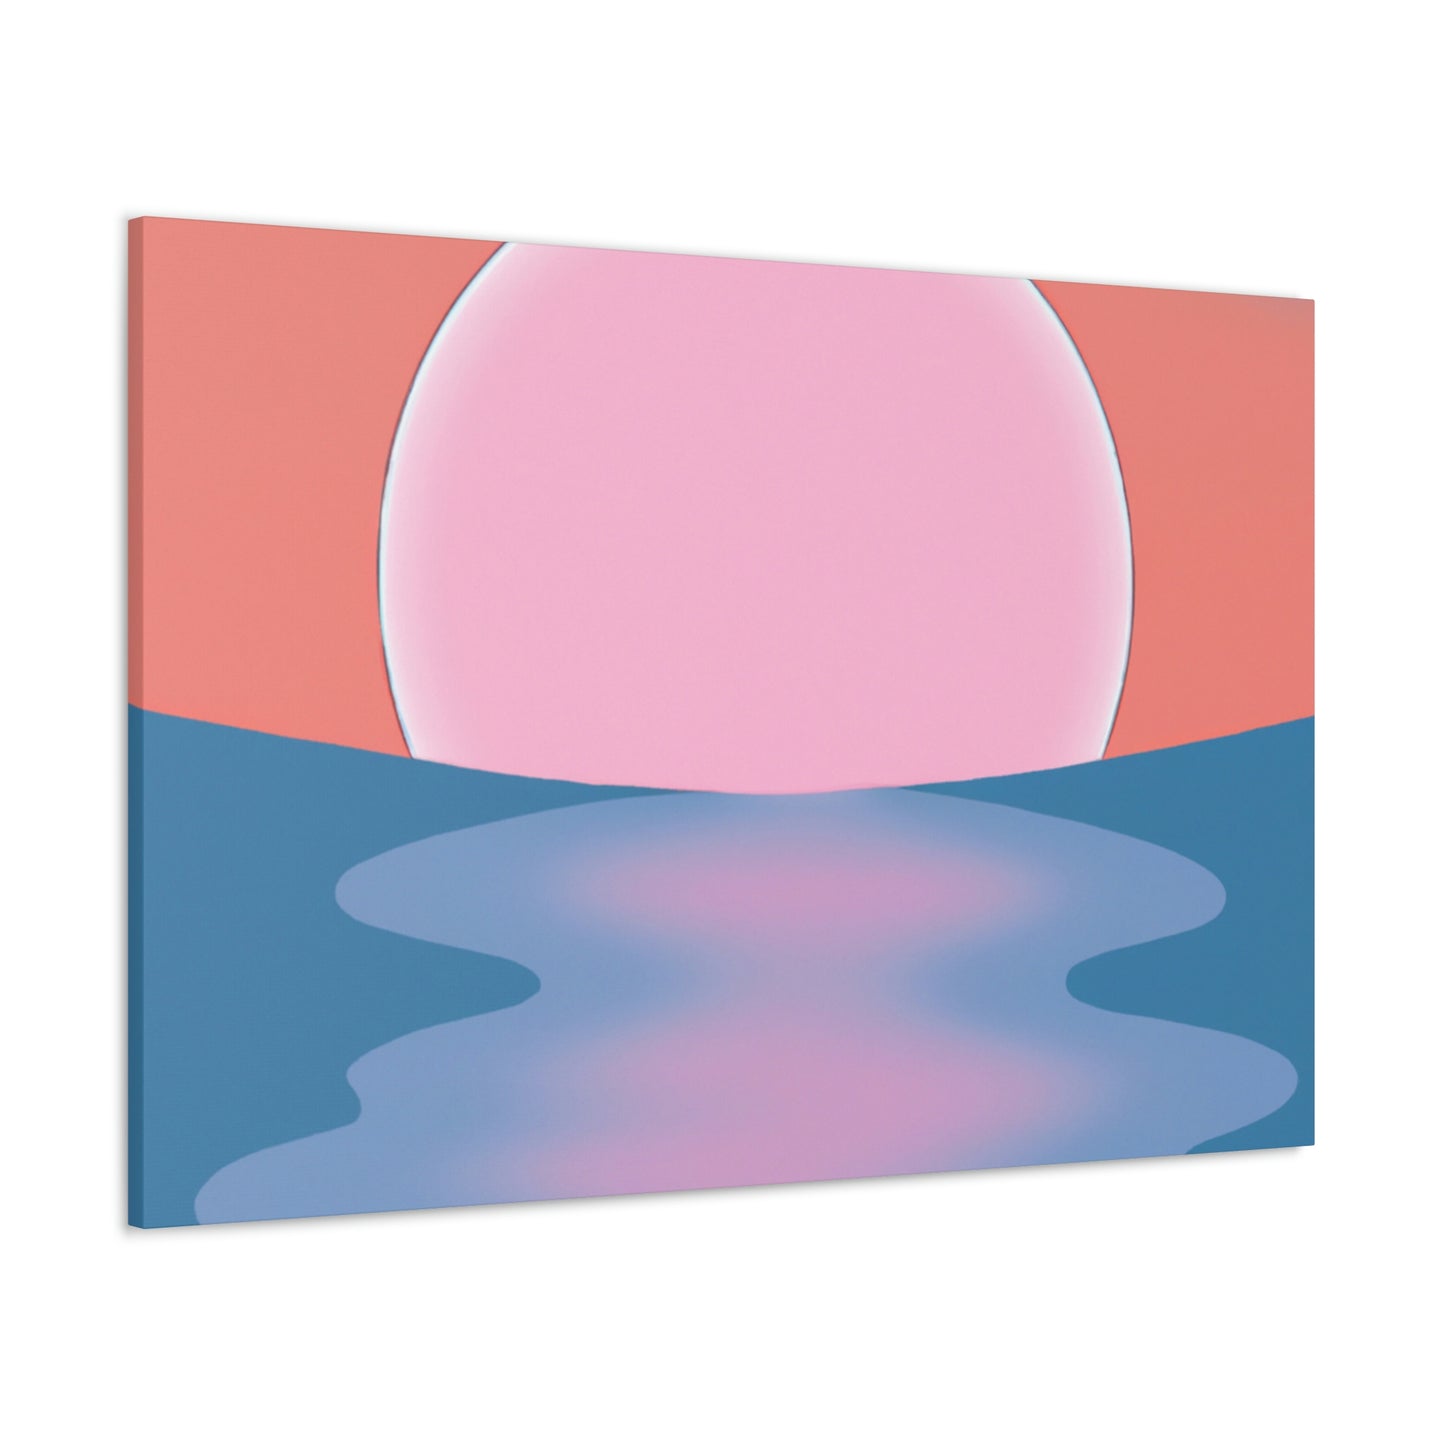 "Serenity at Sunset" - The Alien Canva